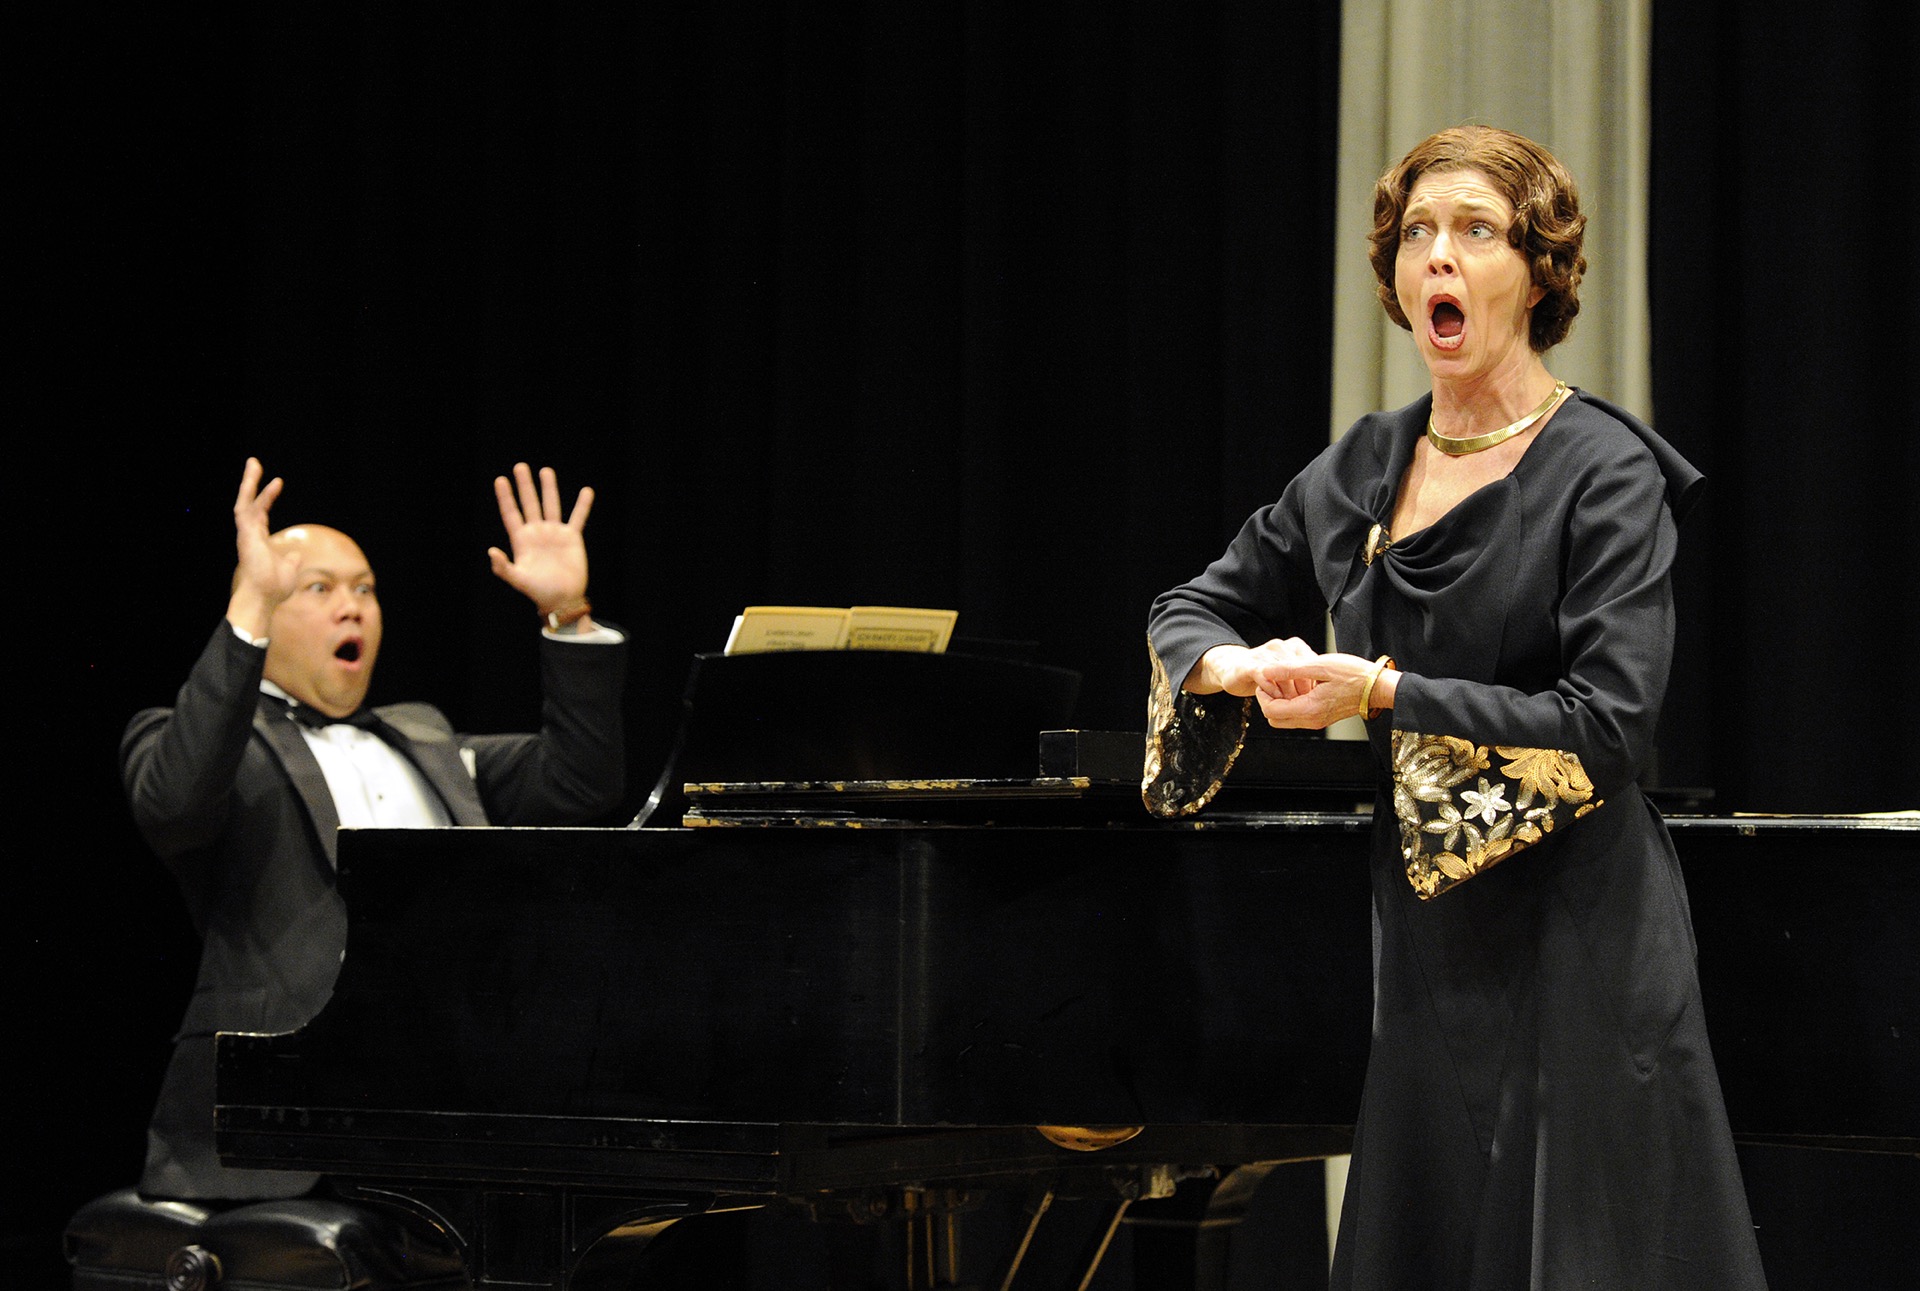 Souvenir: A Fantasia on the Life of Florence Foster Jenkins